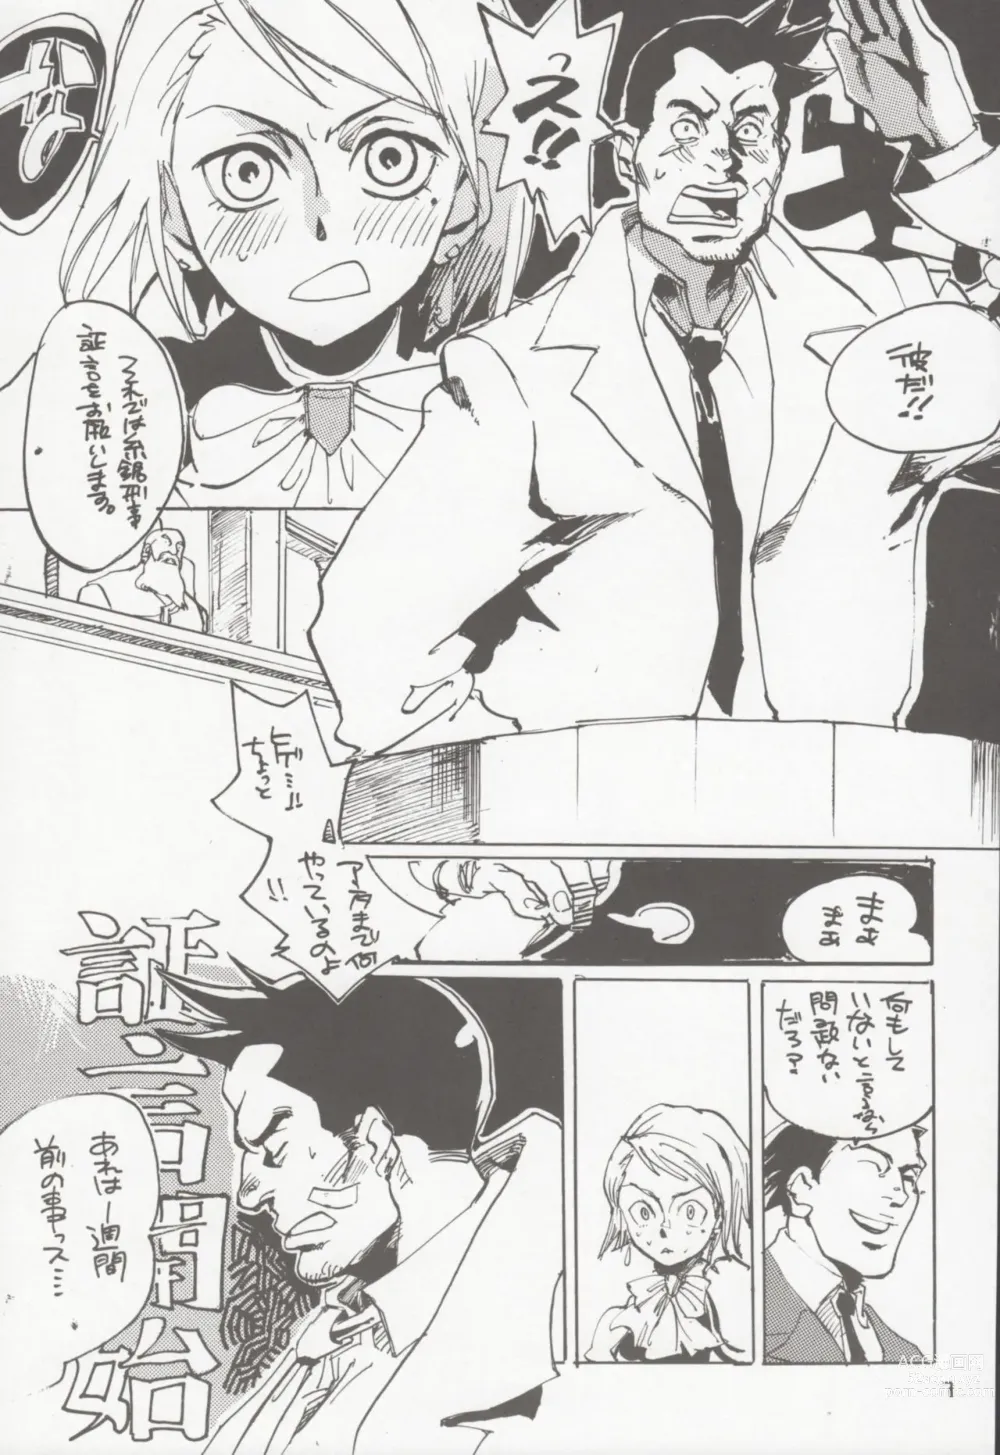 Page 6 of doujinshi Reversal trial